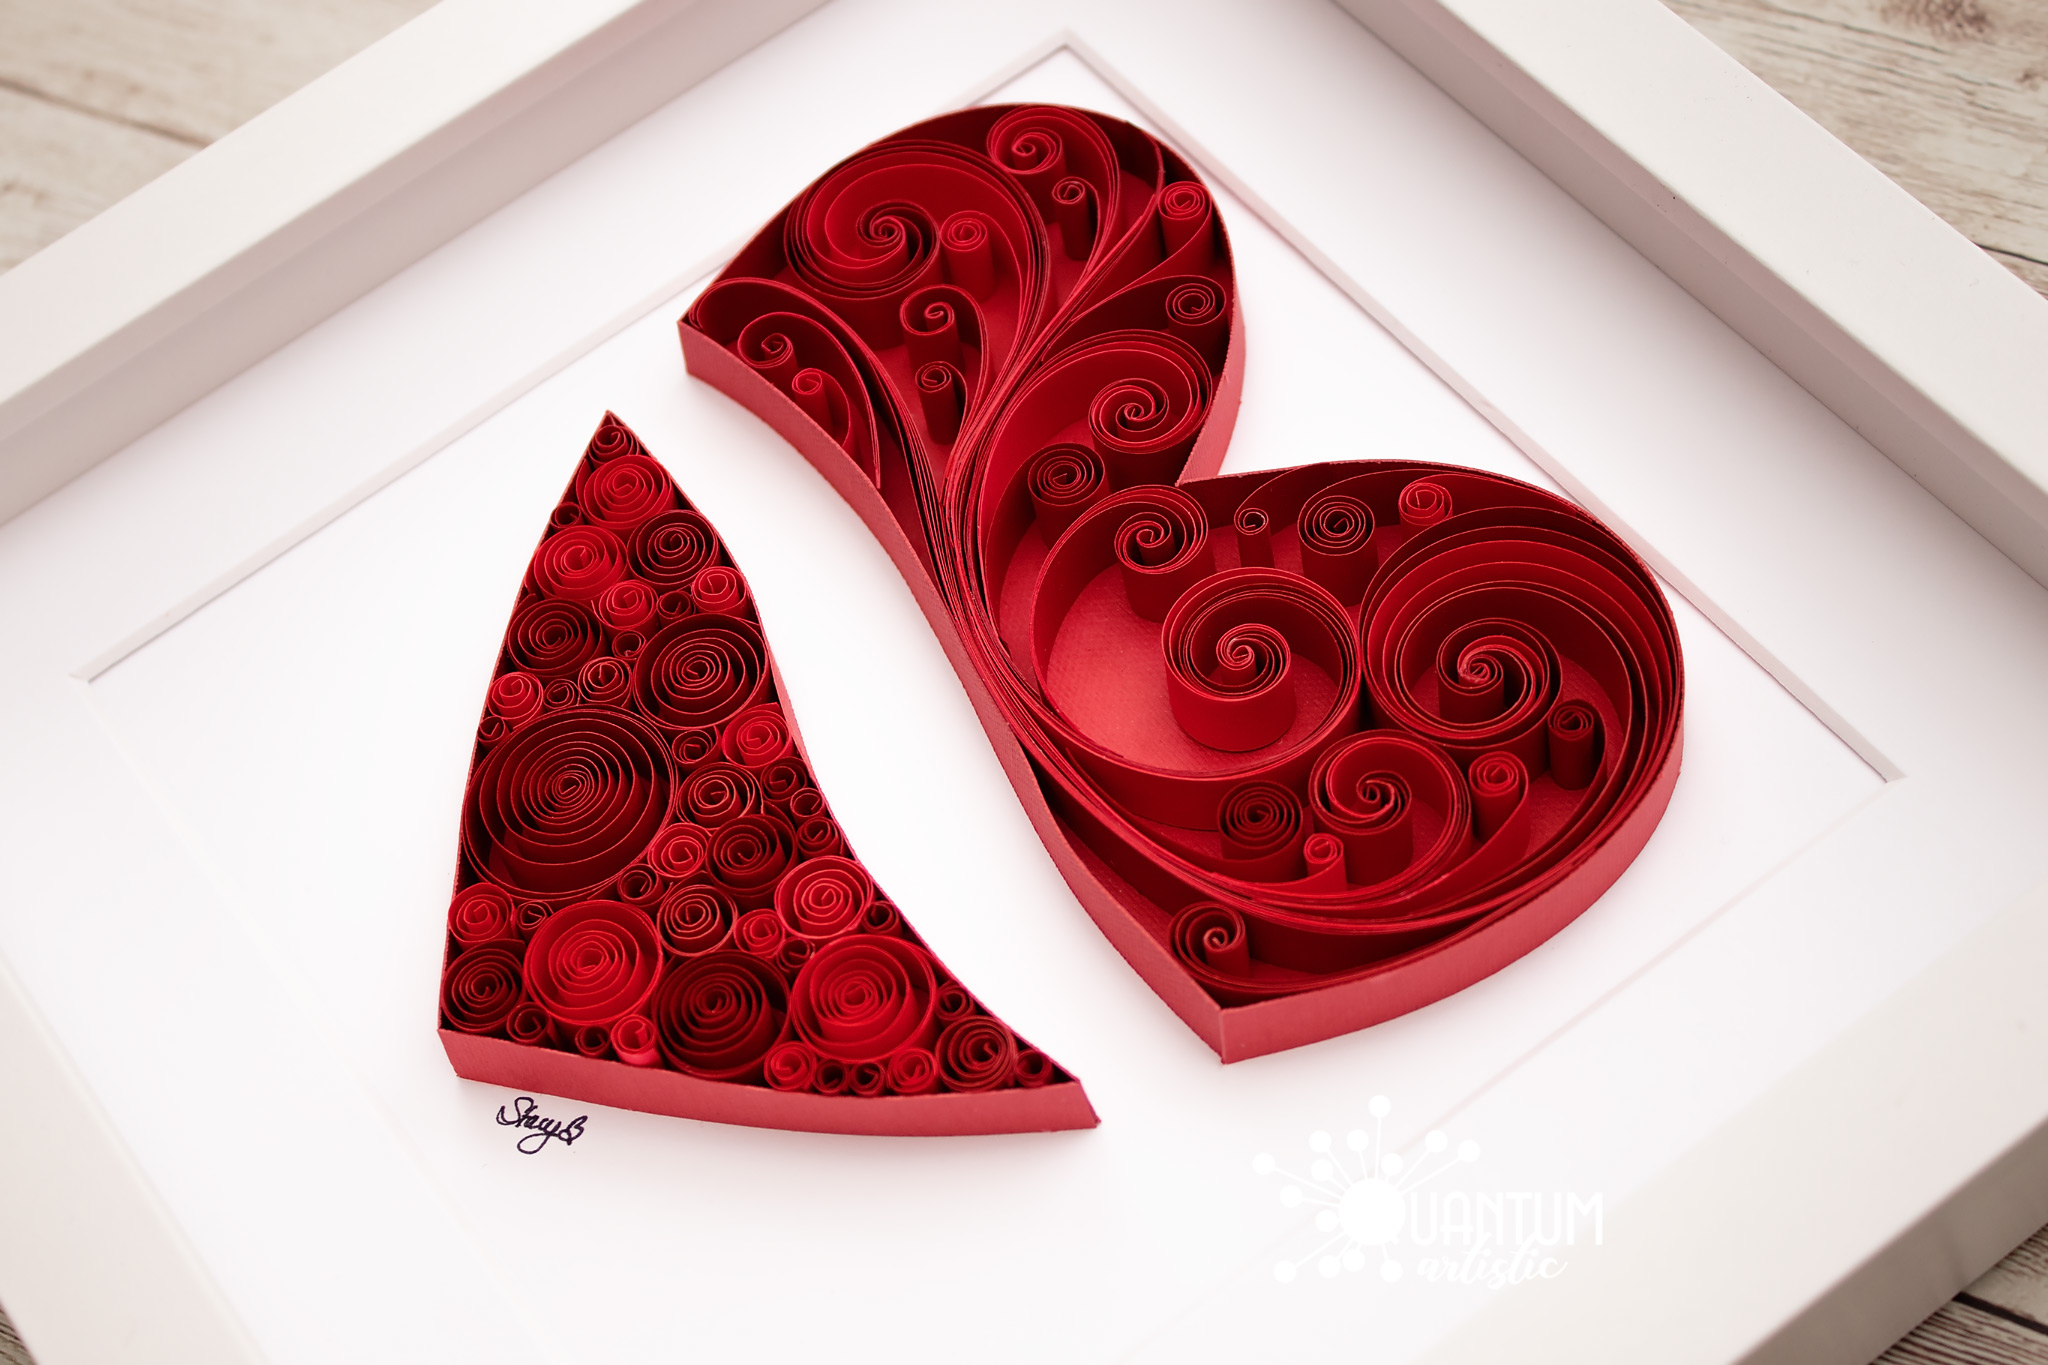 A Quilled Scrollwork Heart: A Tale of Unfinished Artistry